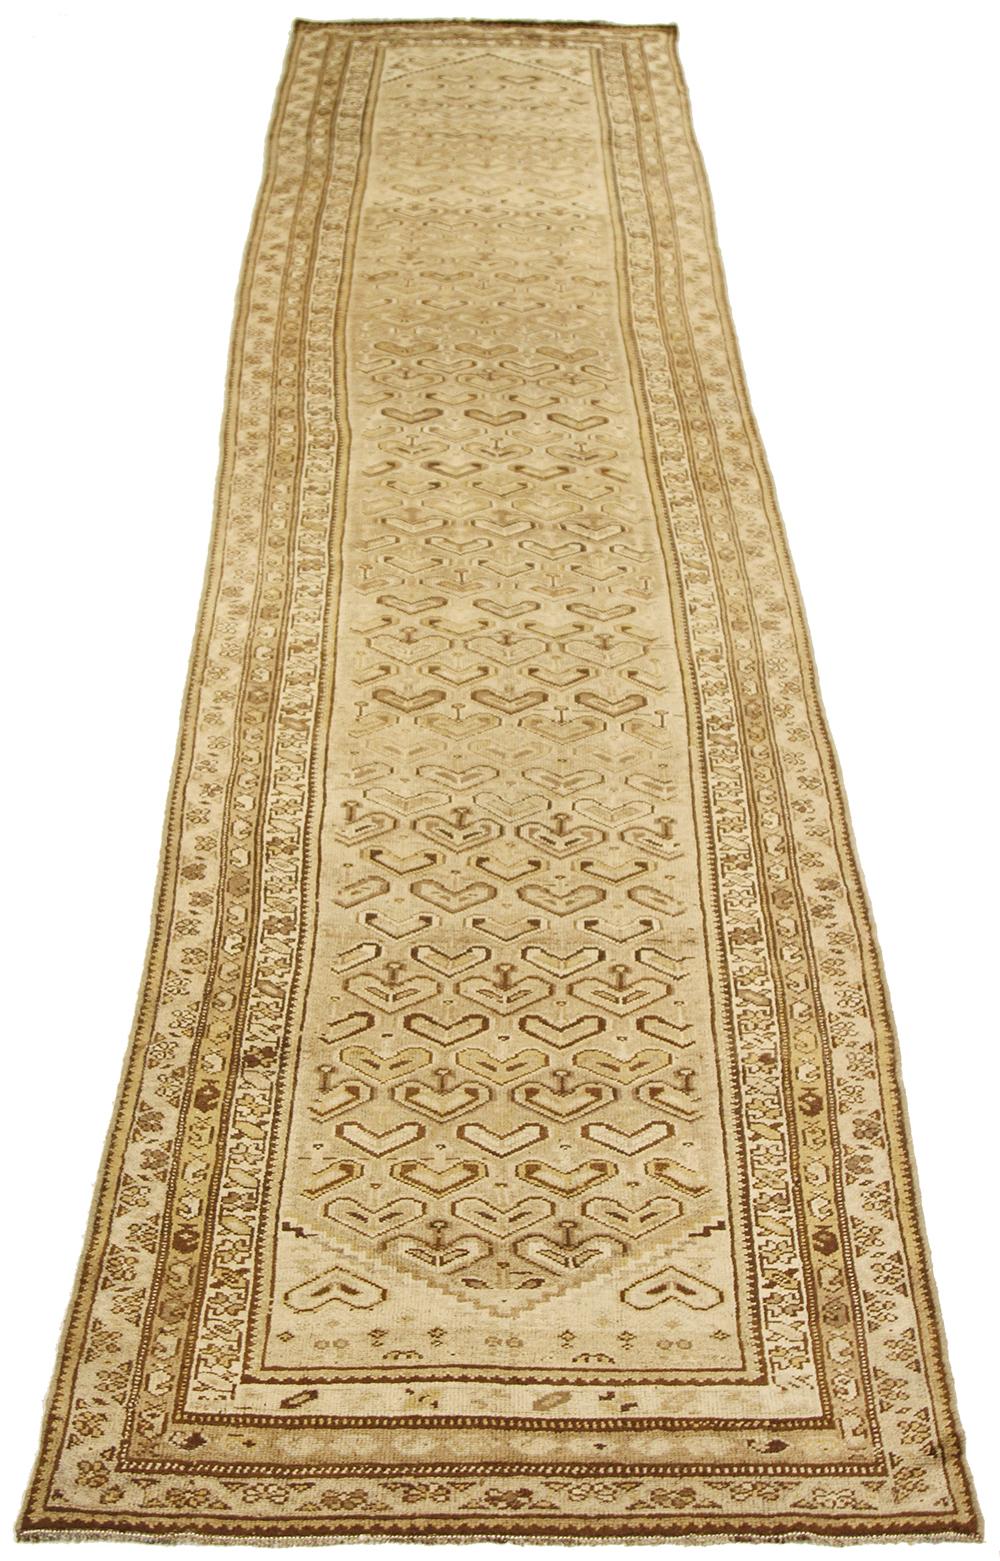 Antique Persian runner rug handwoven from the finest sheep’s wool and colored with all-natural vegetable dyes that are safe for humans and pets. It’s a traditional Malayer design featuring brown and beige heart-shaped details on an ivory field. It’s